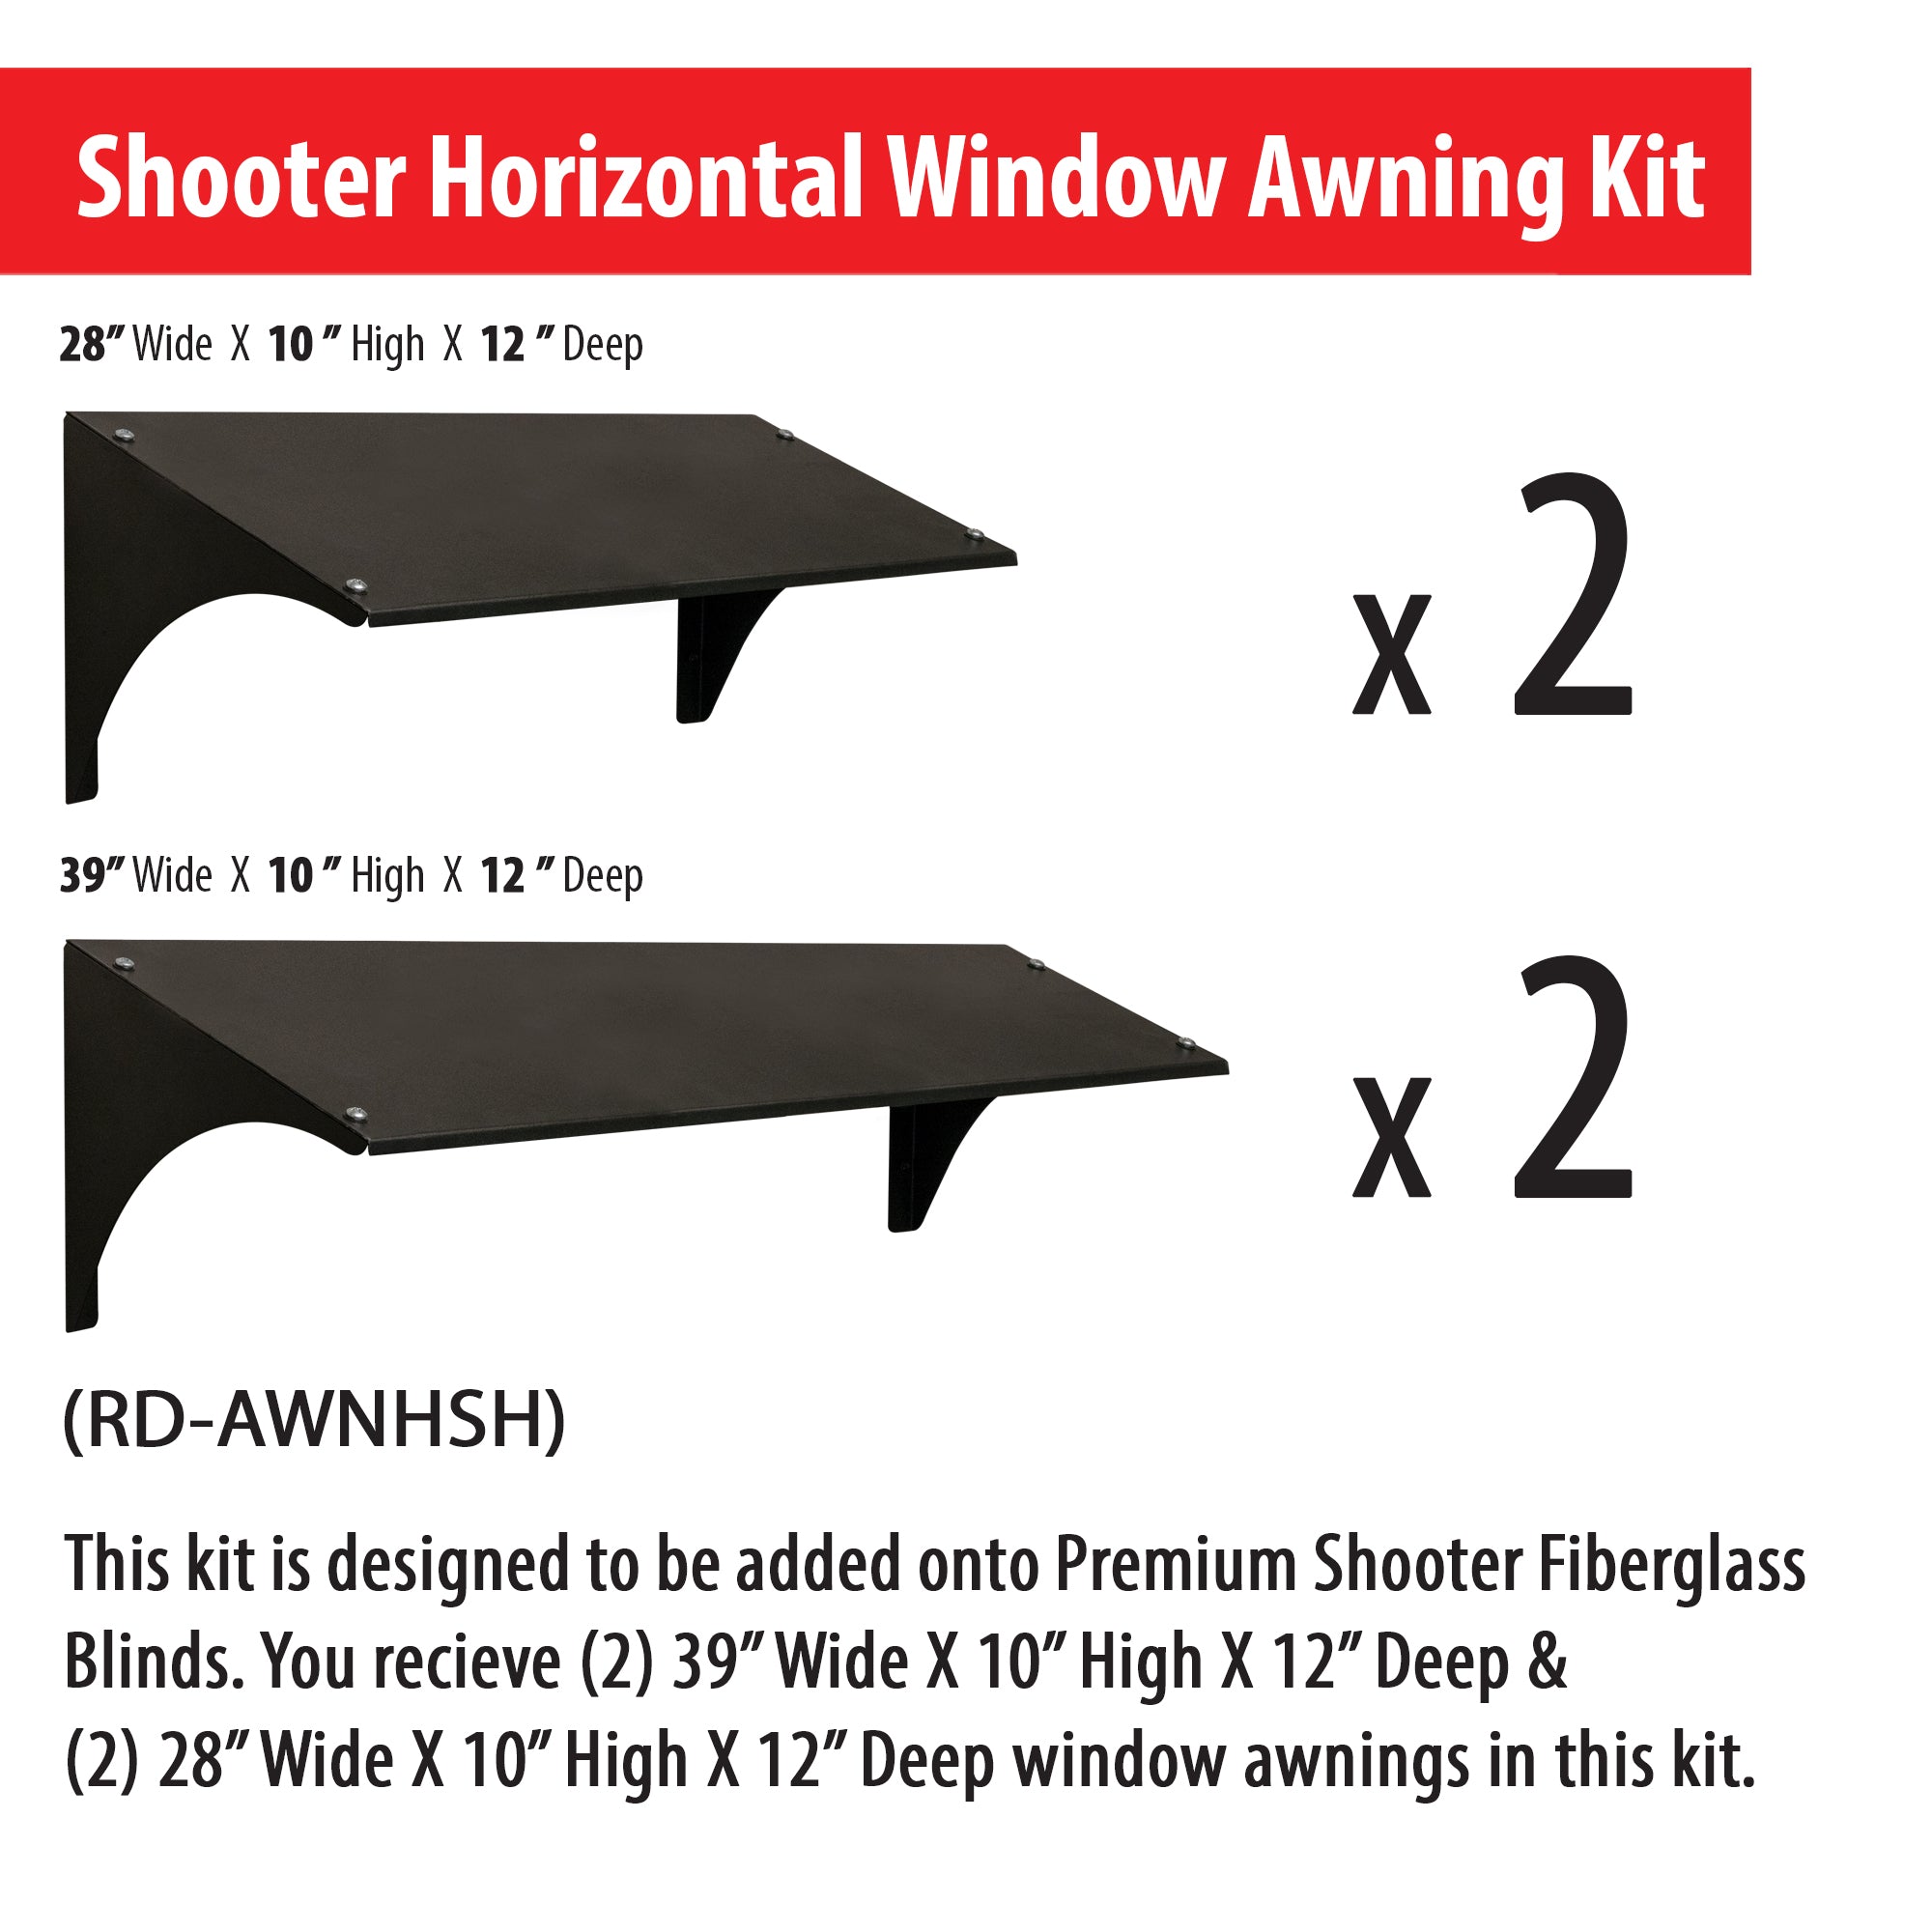 Horizontal window awning dimensions for Shooter